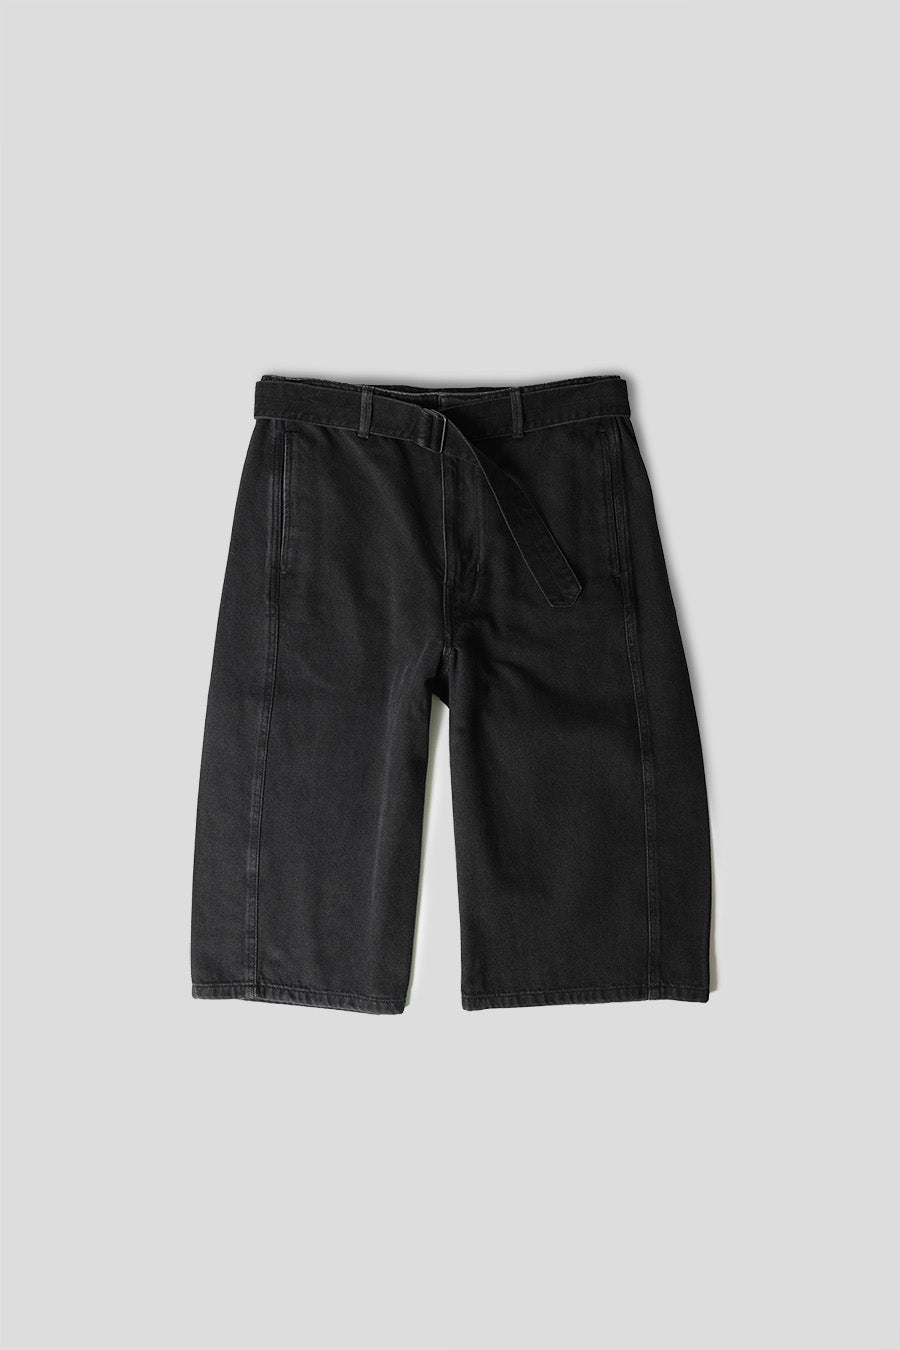 LEMAIRE - TWISTED BELTED SHORTS BLEACHED BLACK - LE LABO STORE